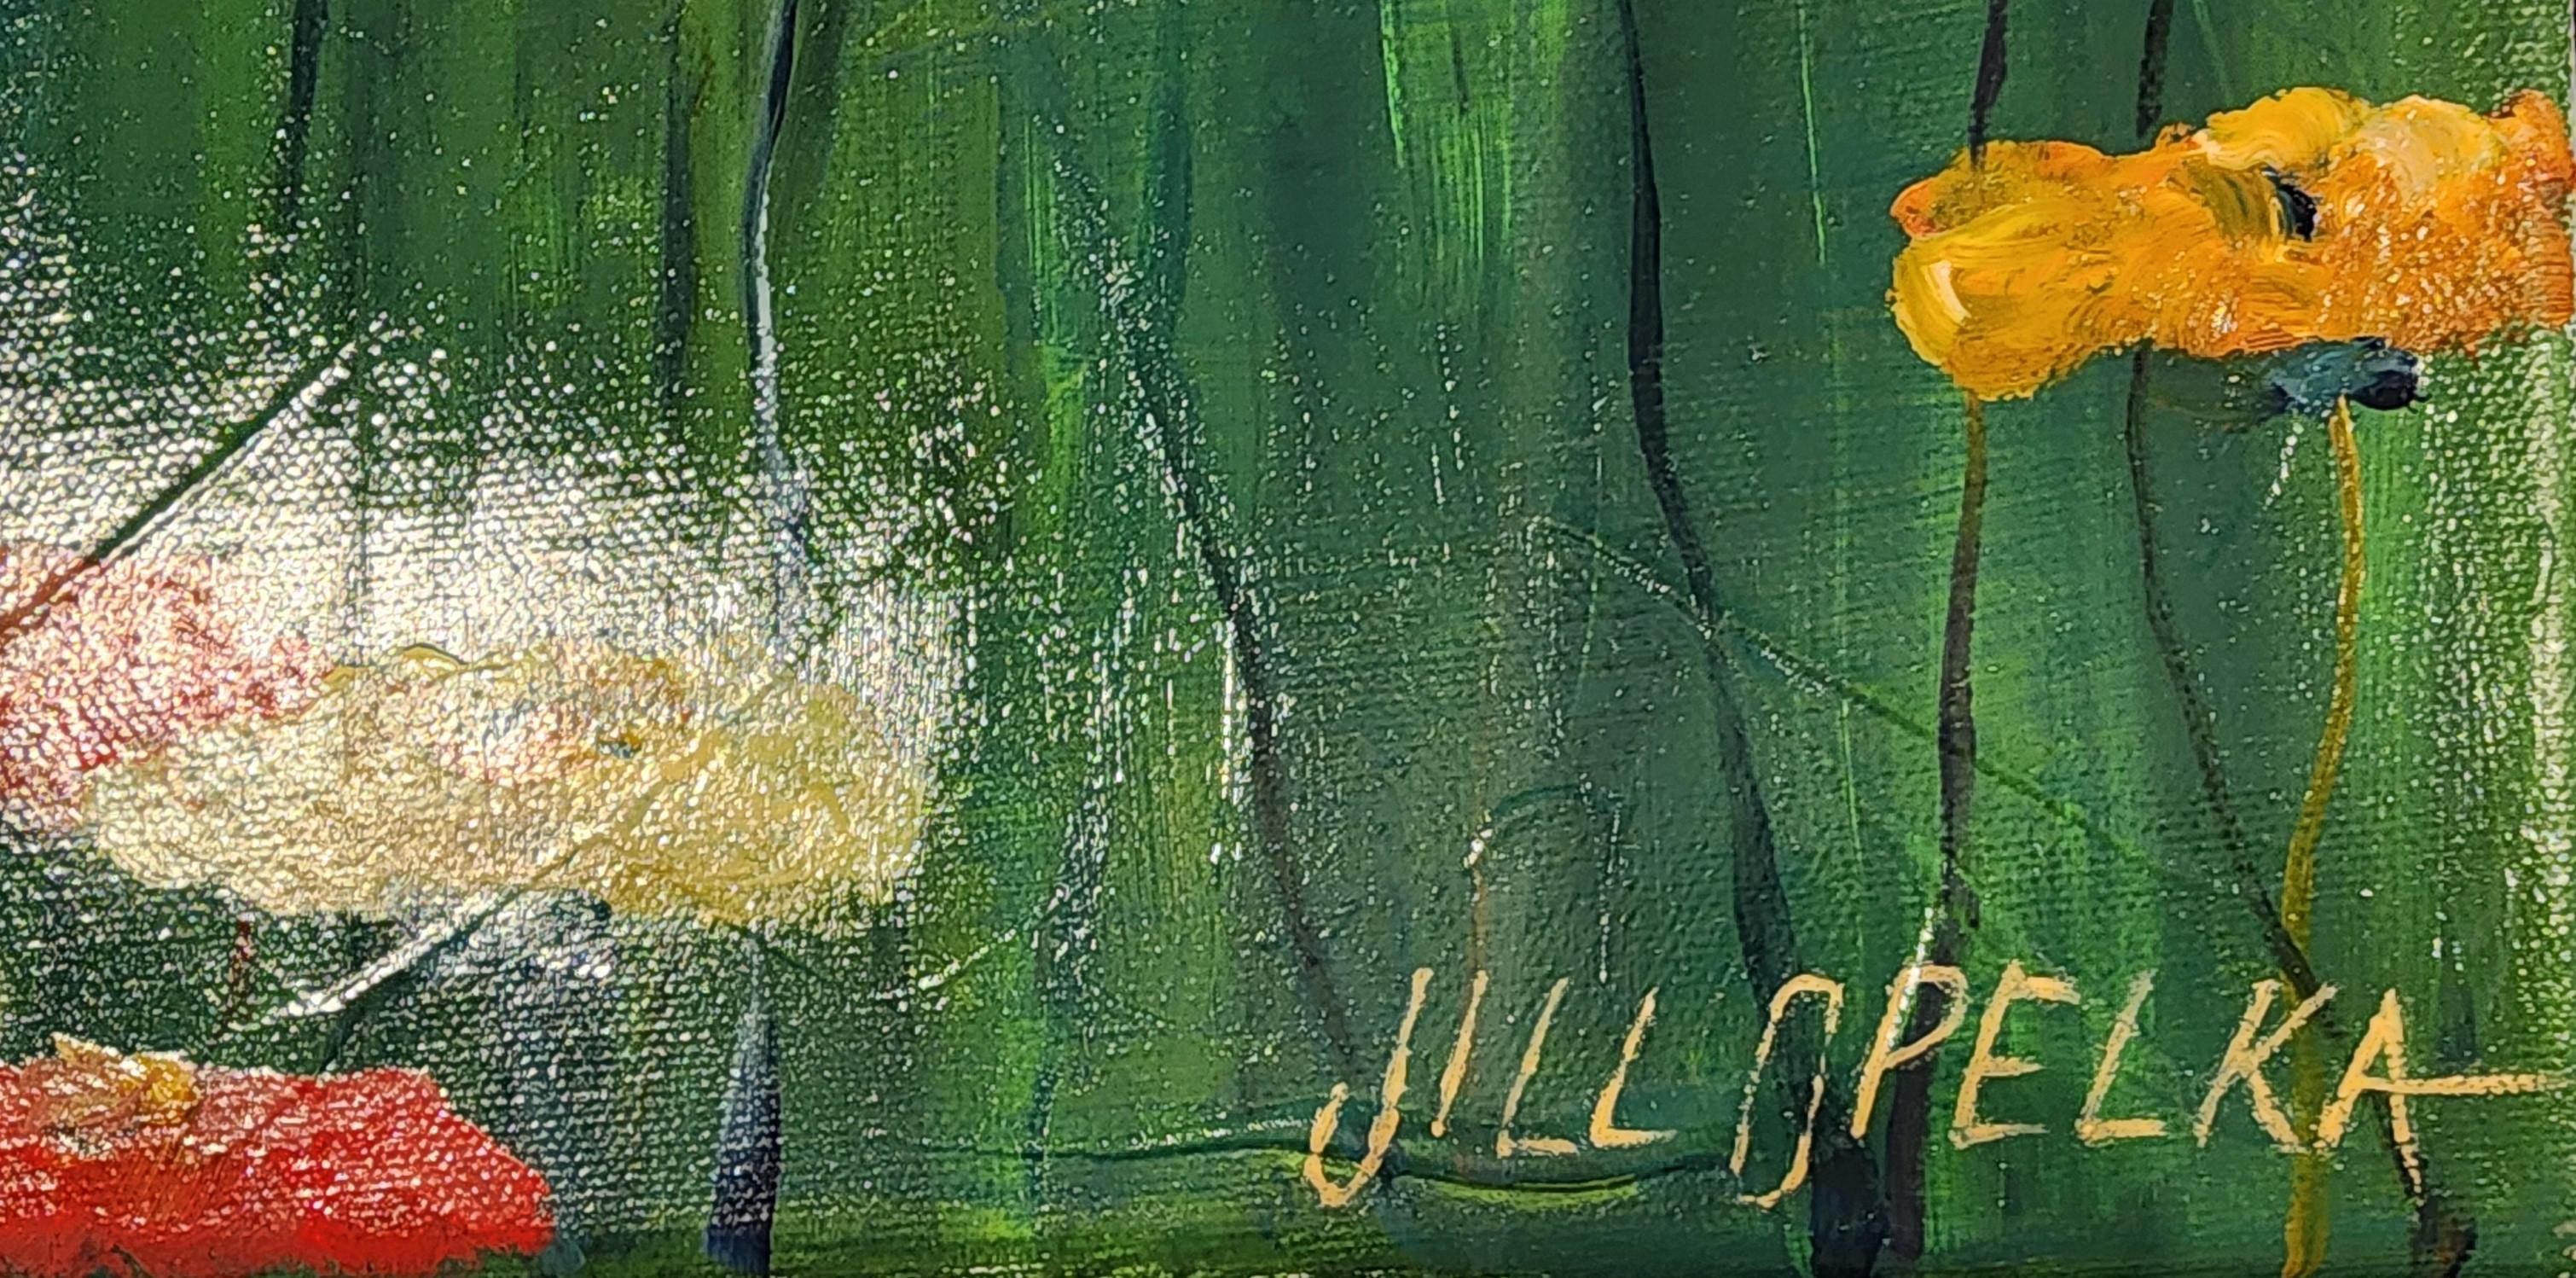 Jill Opelka
Blooms 
Oil on Canvas
Year: 2023
Size: 18 x 14 inches
Framed: 19 x 15 x 1.5 inches
Signed
COA provided

Tags: Blooms, Flowers, Saturated, Green, Yellow, Purple, Pink, Red

*Framed in a black wooden frame - ready to